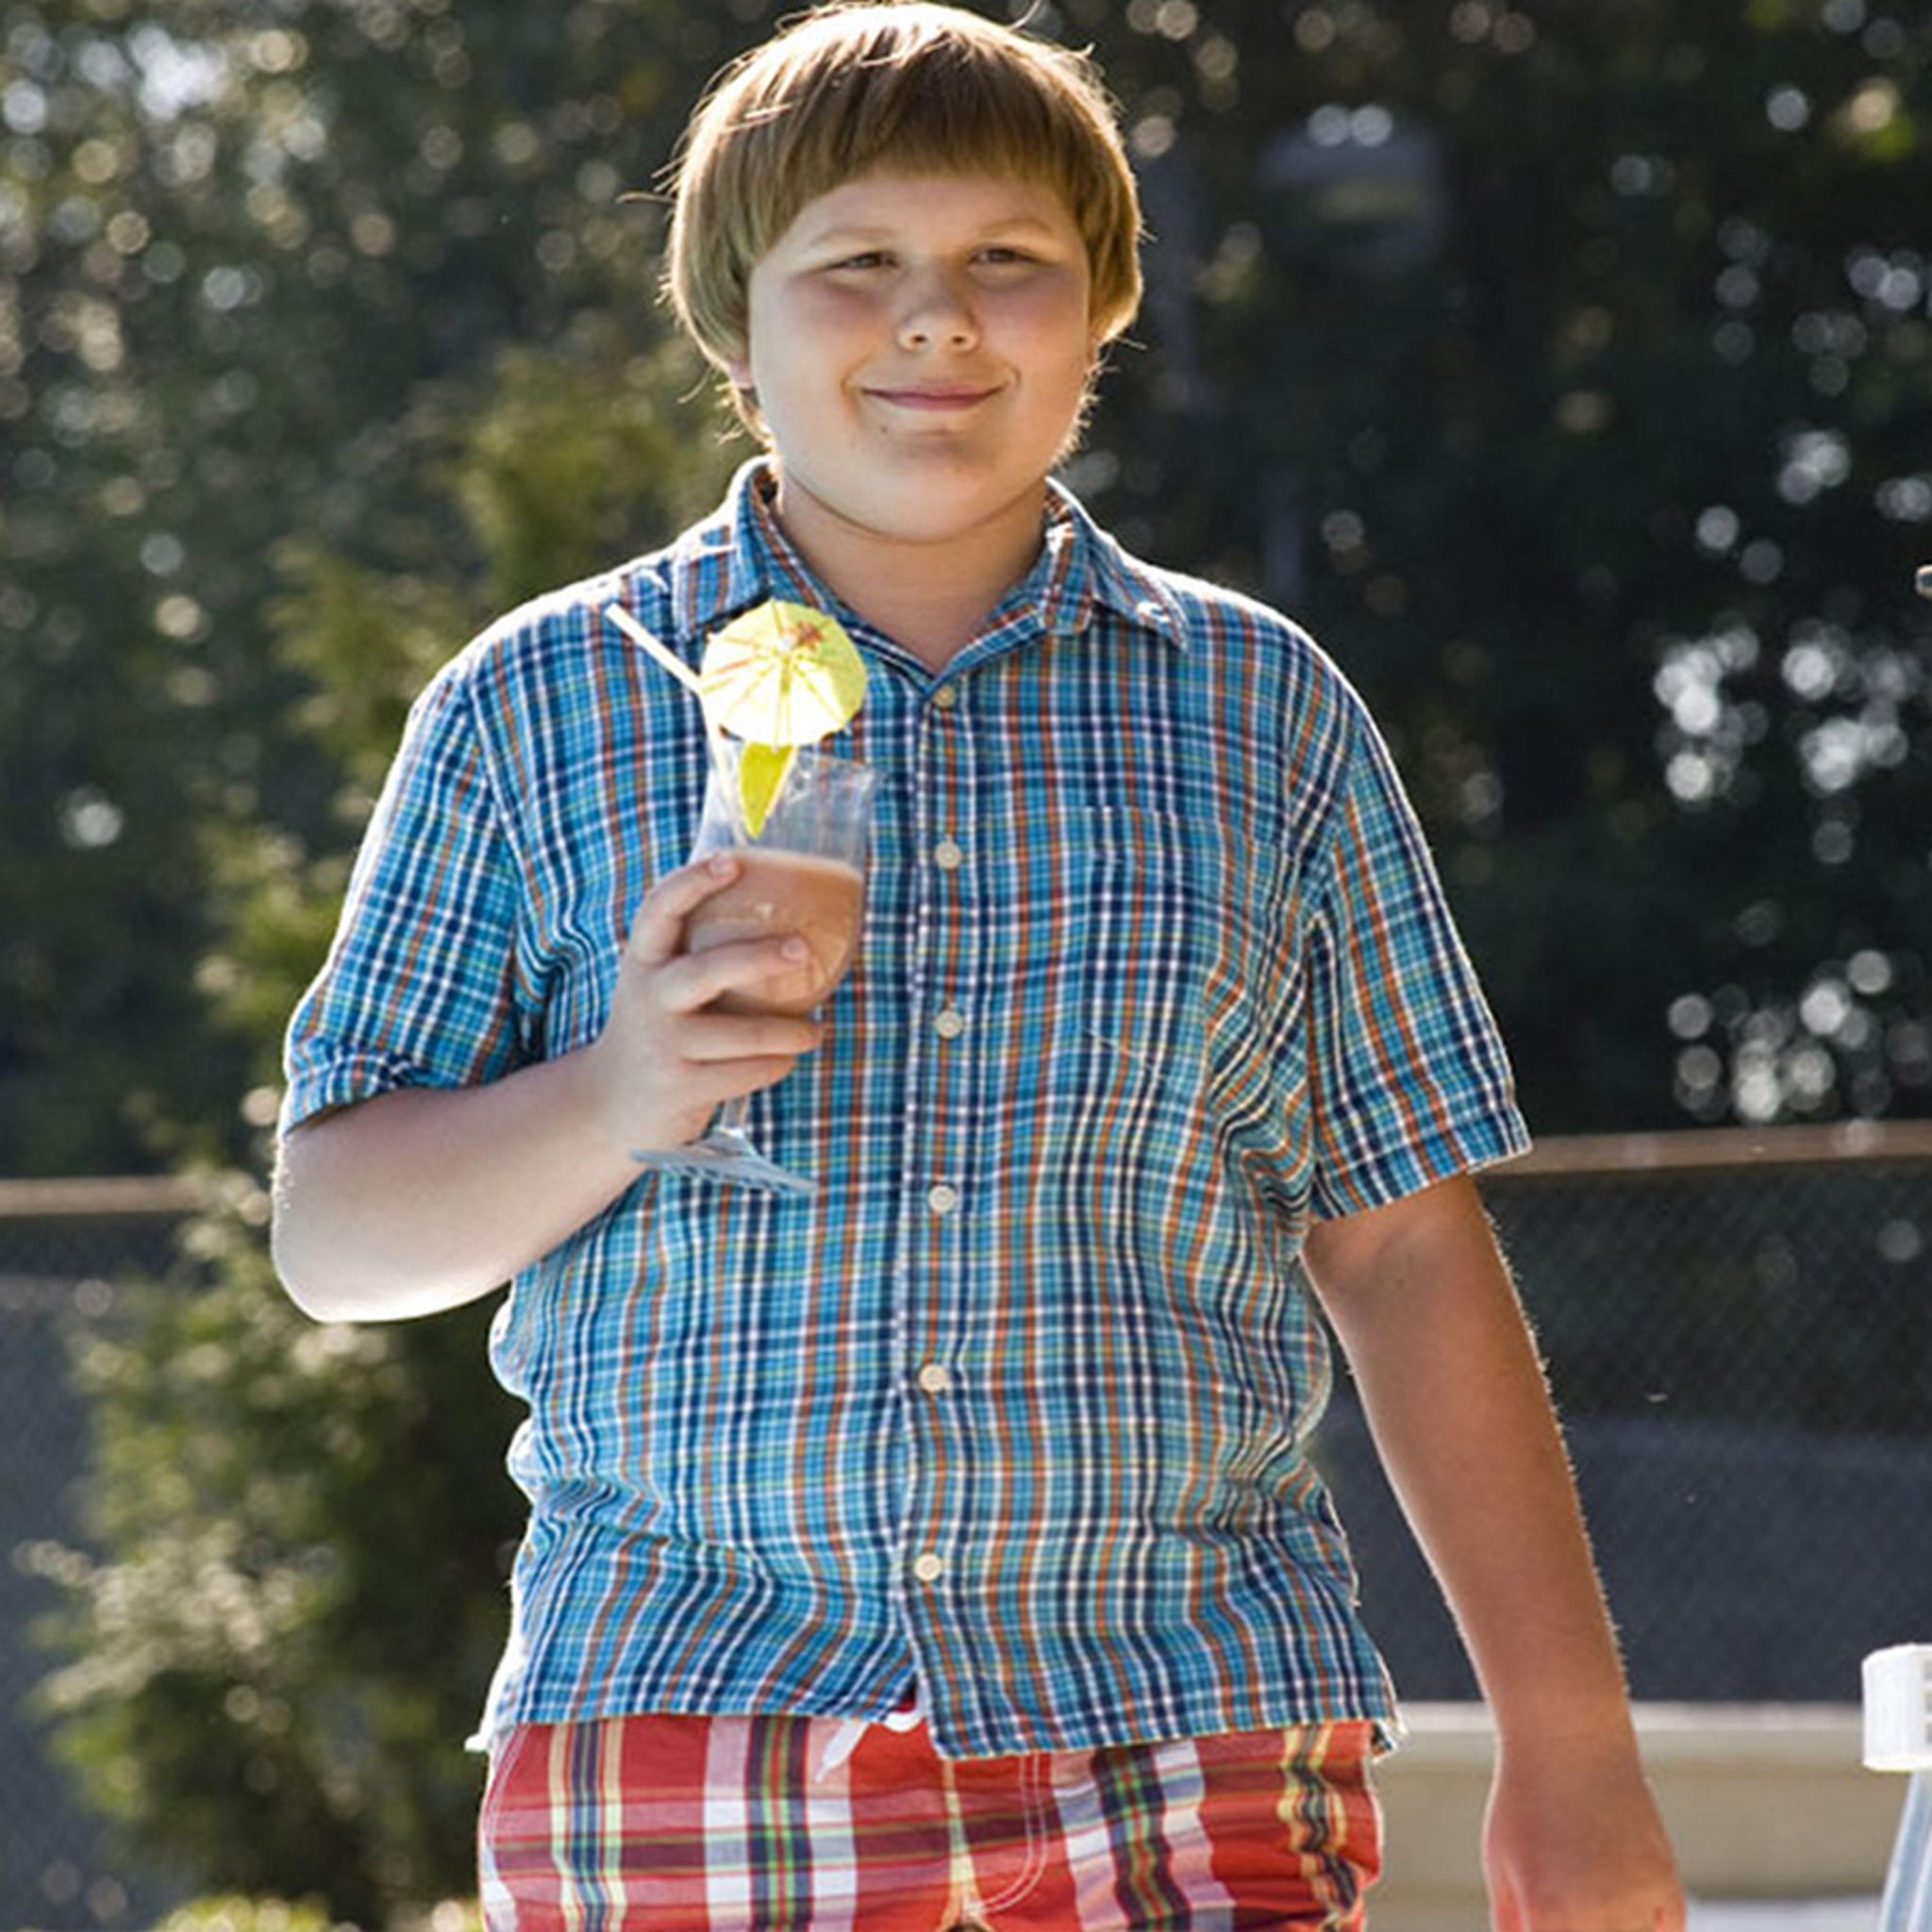 Rowley In 'Diary Of A Wimpy Kid' 'Memba Him?!